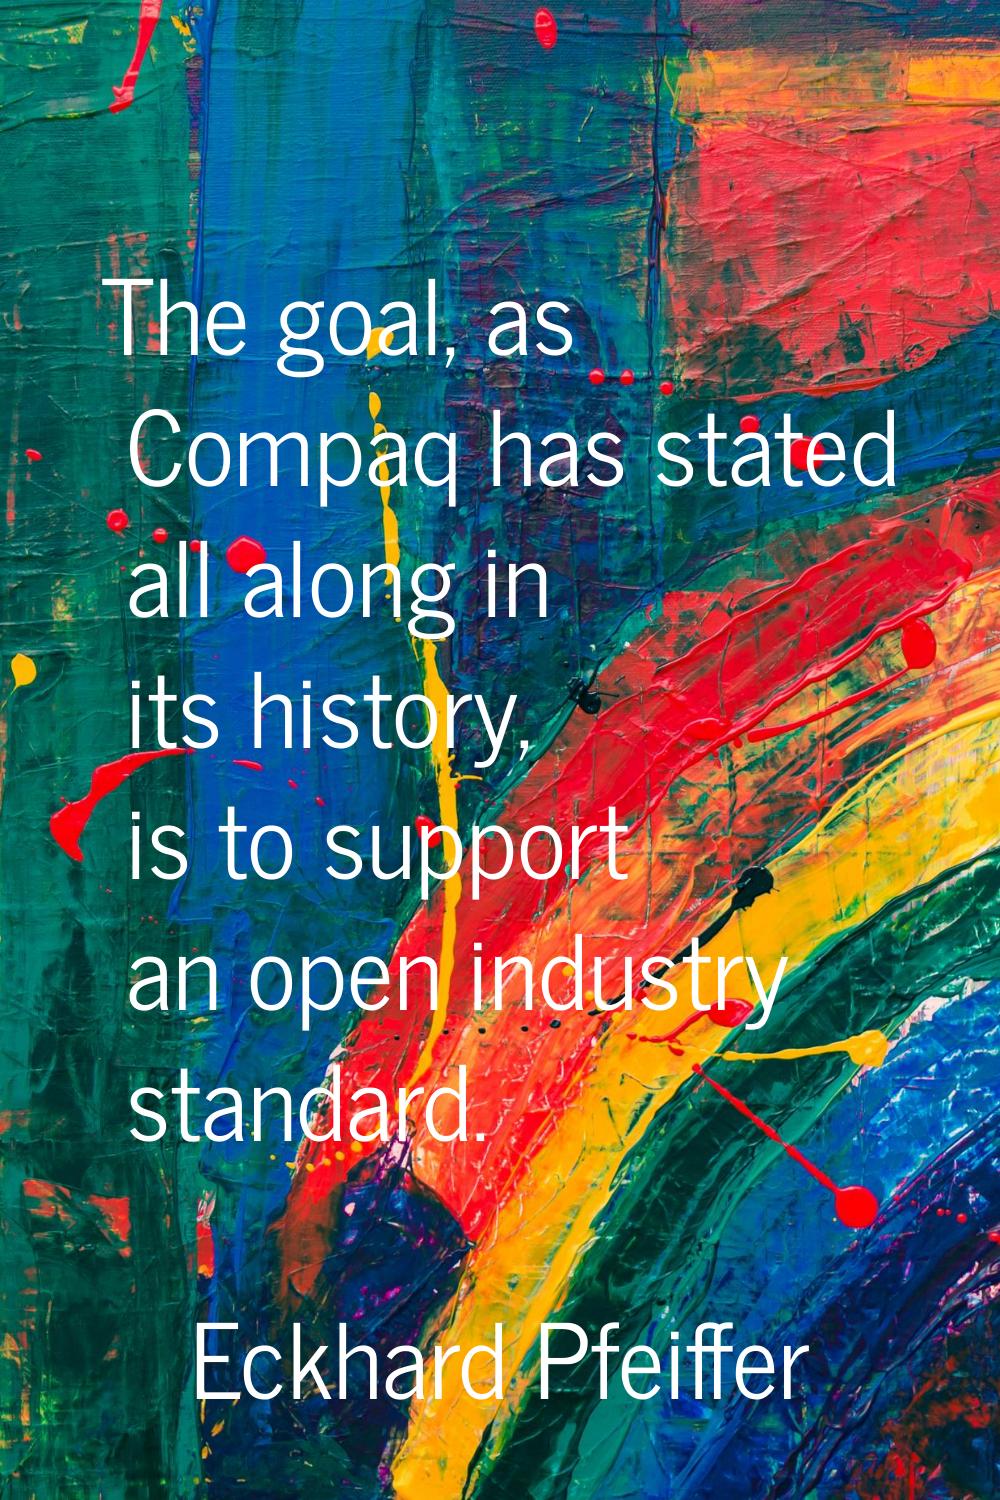 The goal, as Compaq has stated all along in its history, is to support an open industry standard.